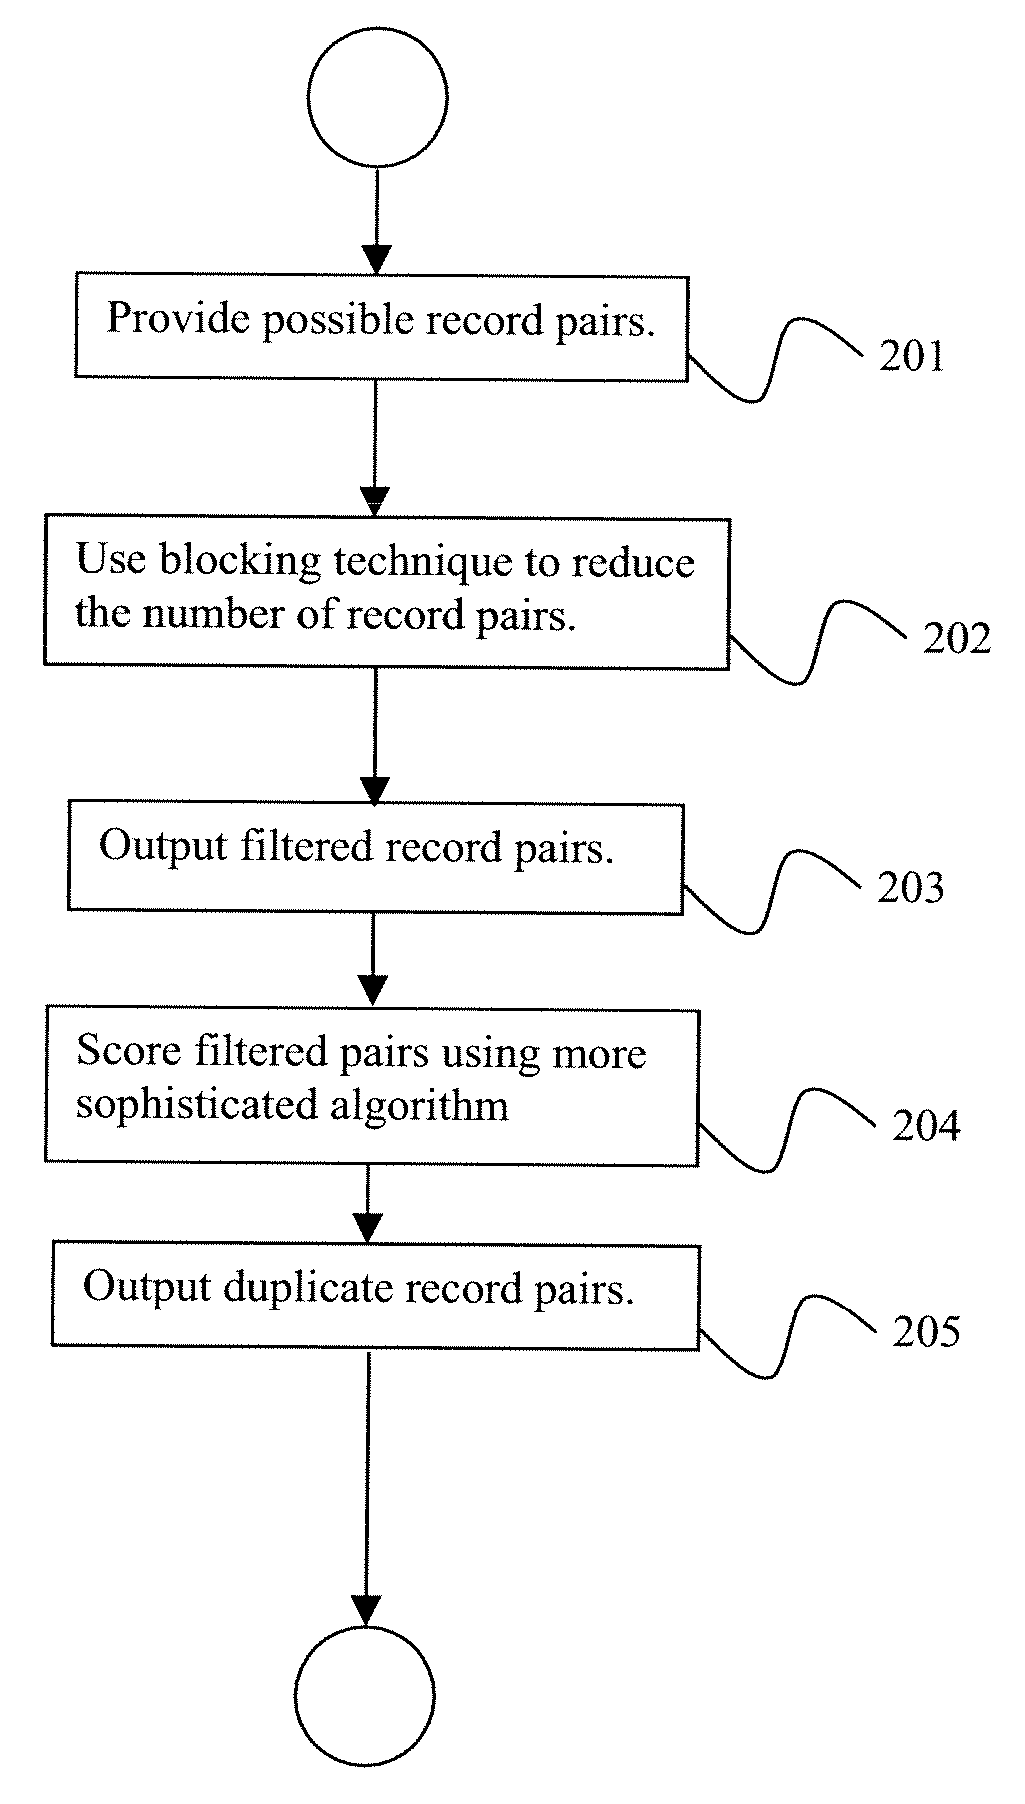 System and Method for Generating Automatic Blocking Filters for Record Linkage